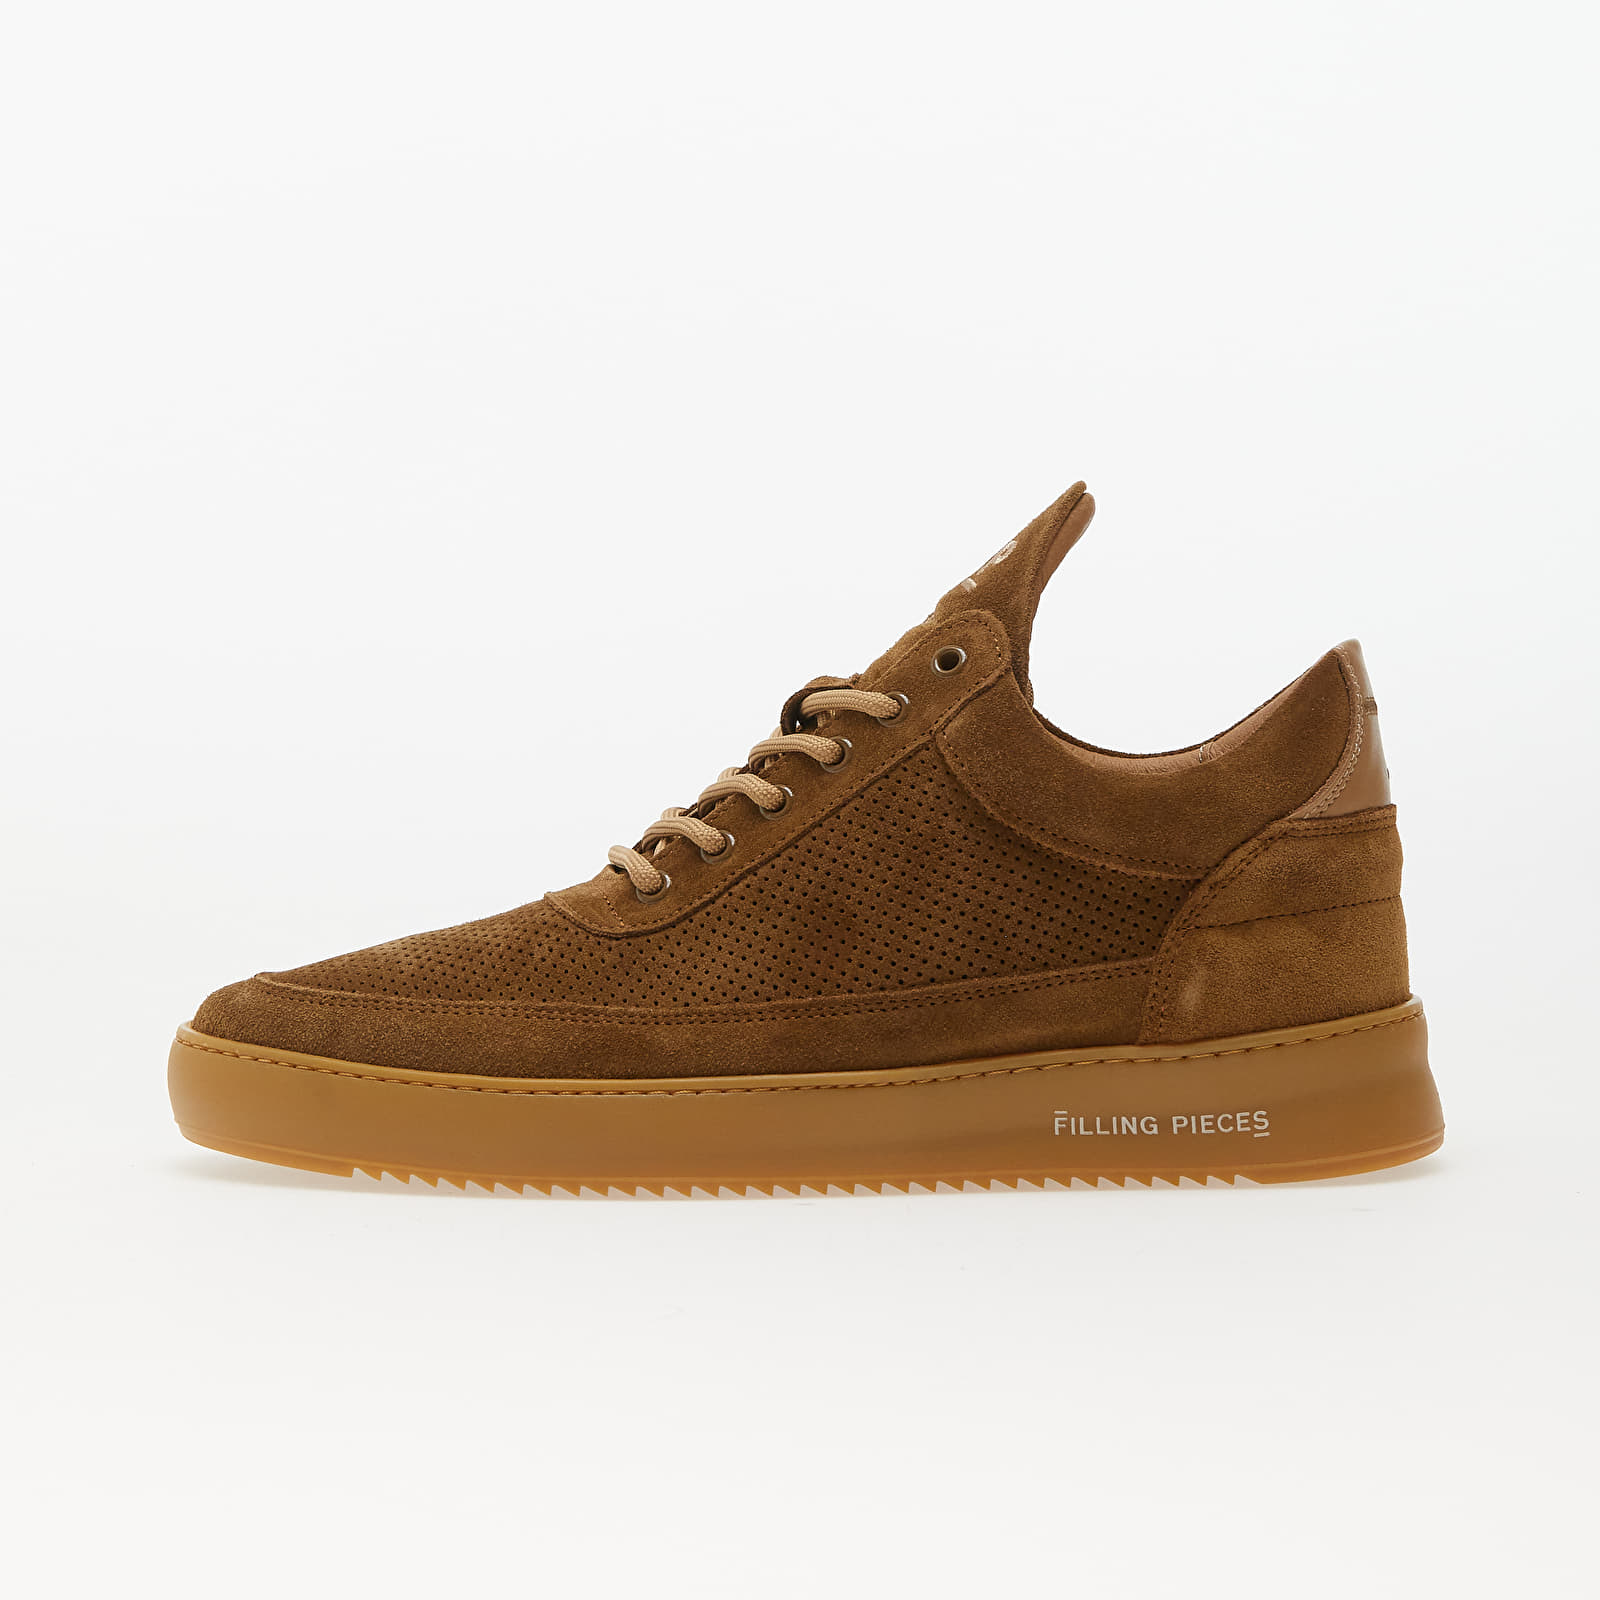 Pánske tenisky a topánky Filling Pieces Low Top Perforated Suede Brown